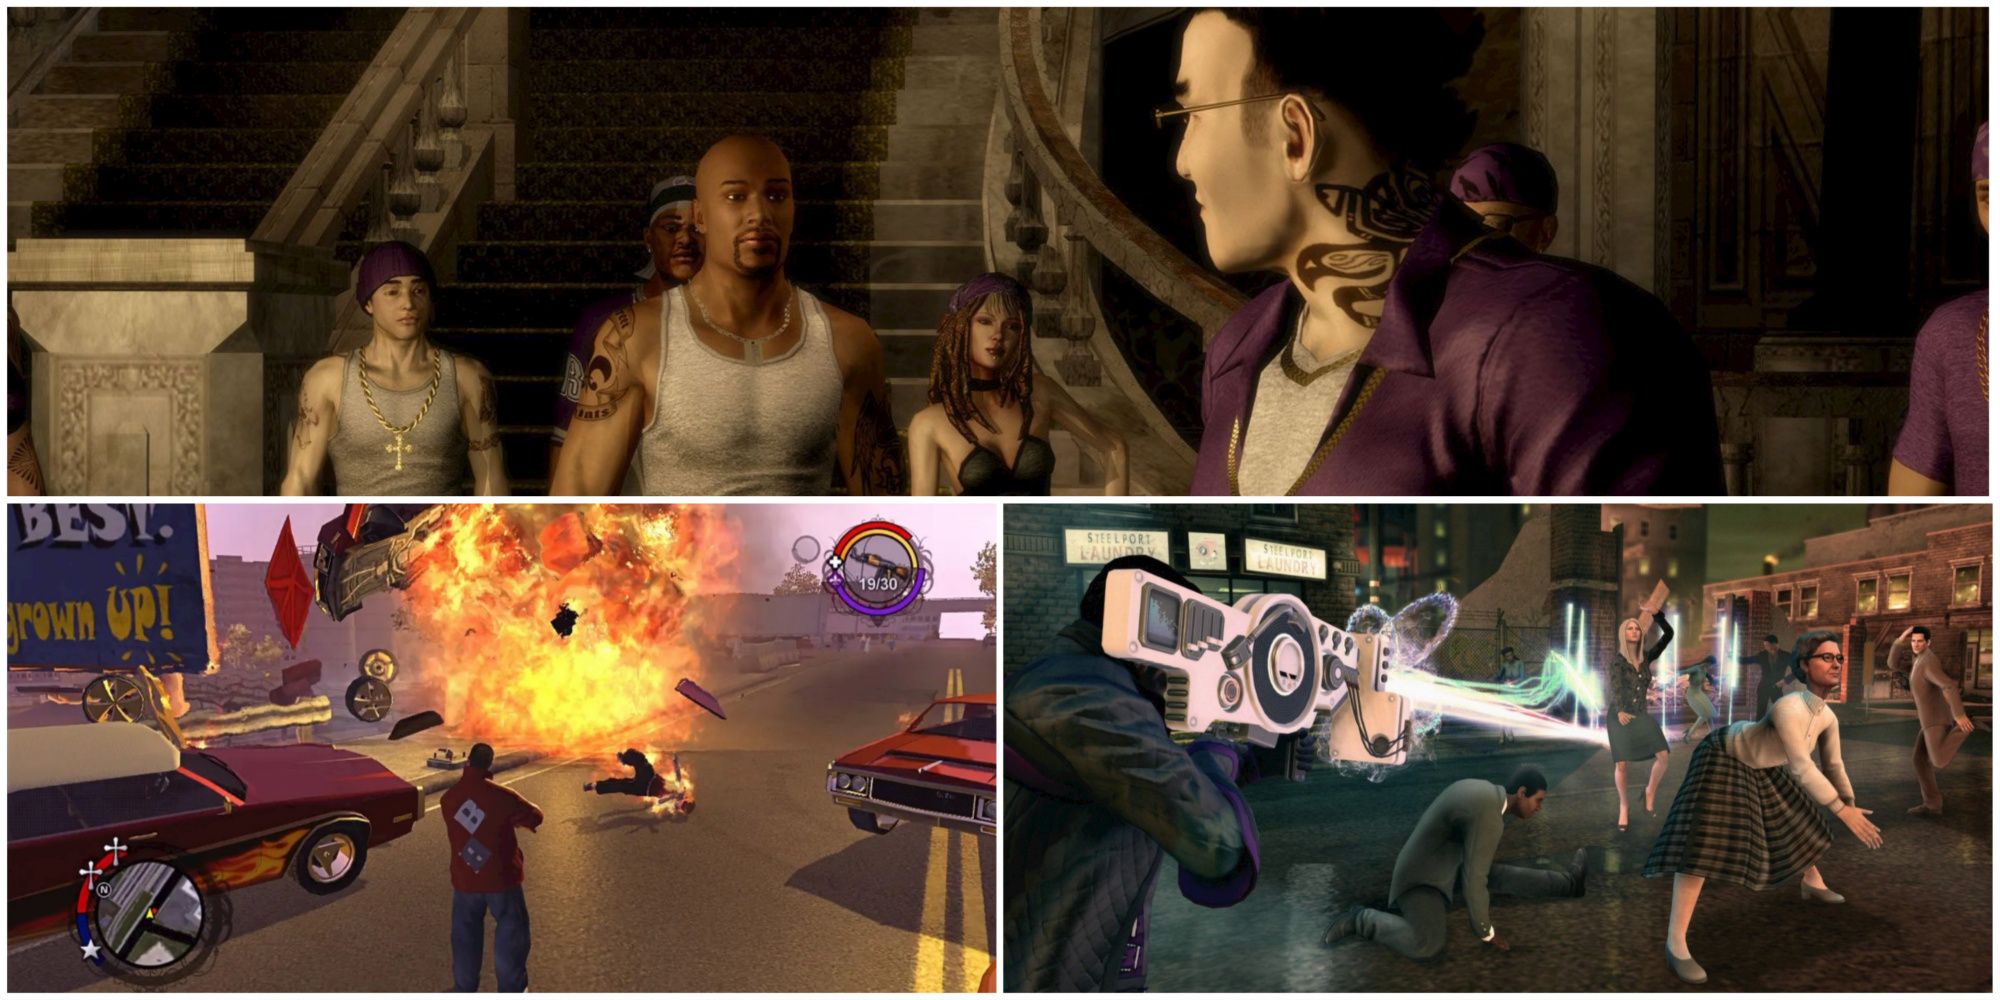 Saints Row review - an underwhelming reboot